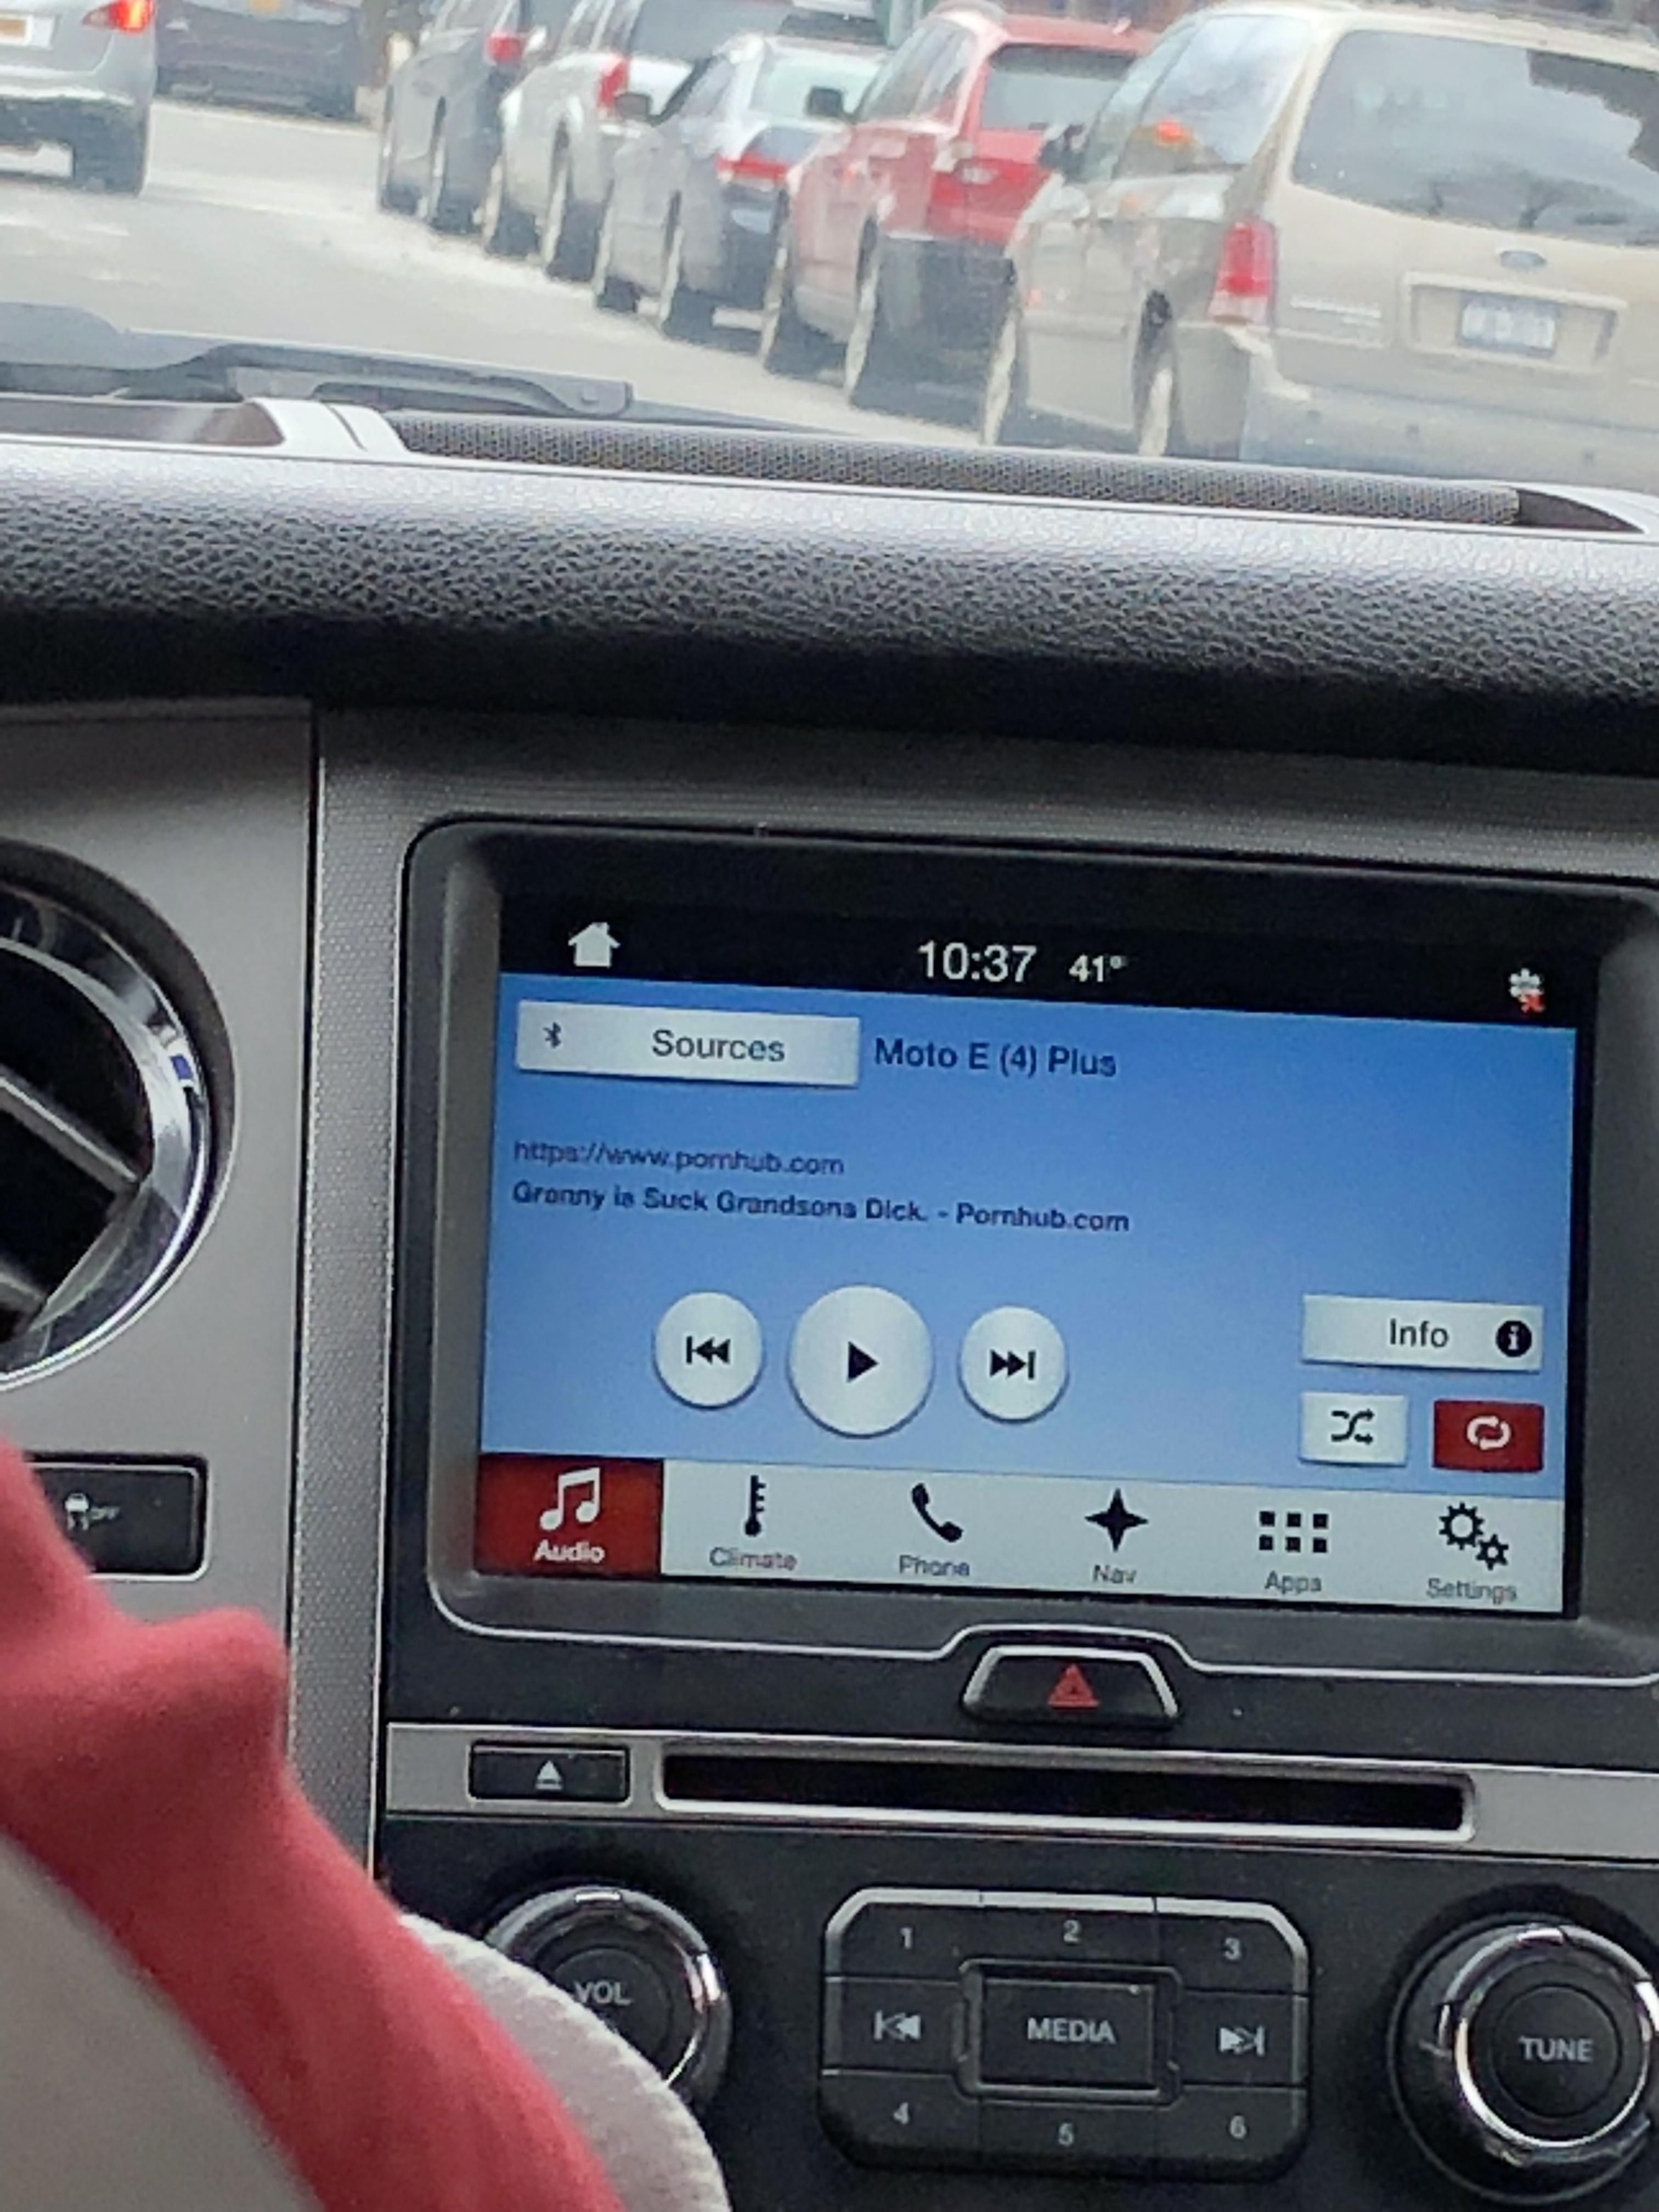 I don’t think my cab driver noticed his phone was connected to his dashboard